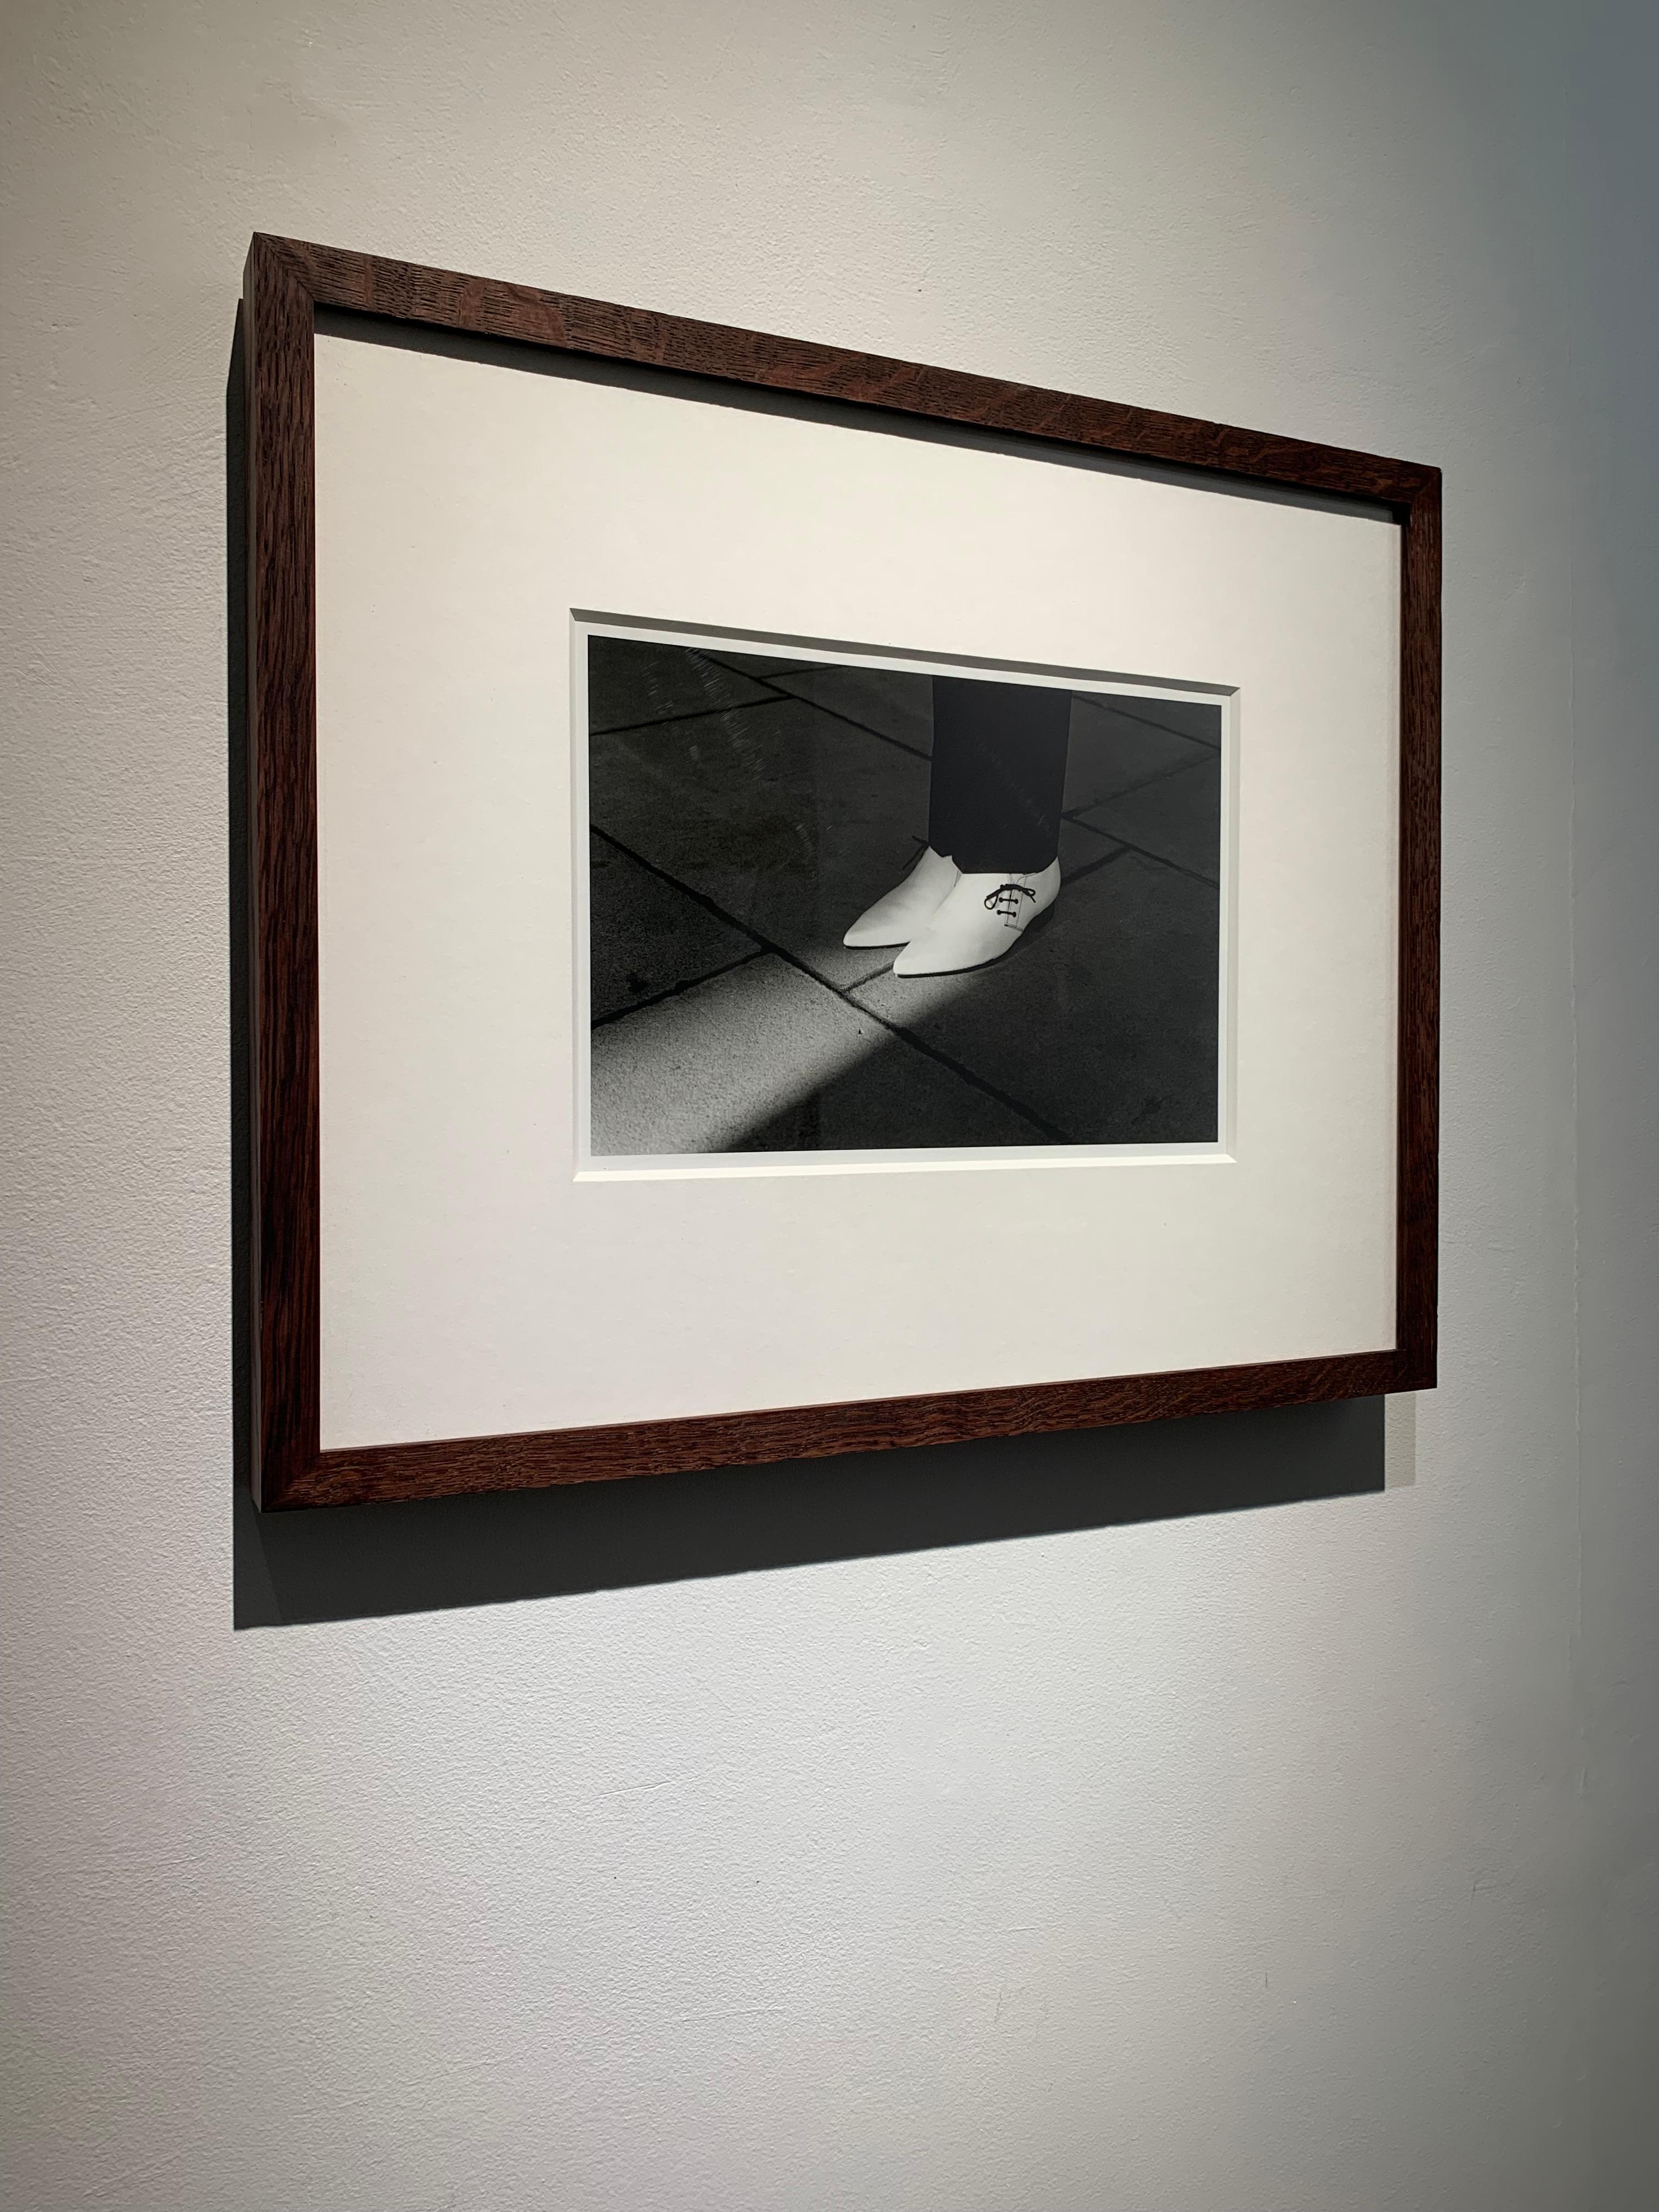 Brian Griffin
Joe Jackson - Look Sharp, 1979
Vintage Gelatin Silver Print, Framed; museum mount board, antireflective art glass, oak frame
Image size; 11 4/5 × 15 7/10 in  30 × 40 cm Frame: 44 x 54 cm

This 1979 photograph was shot for the album